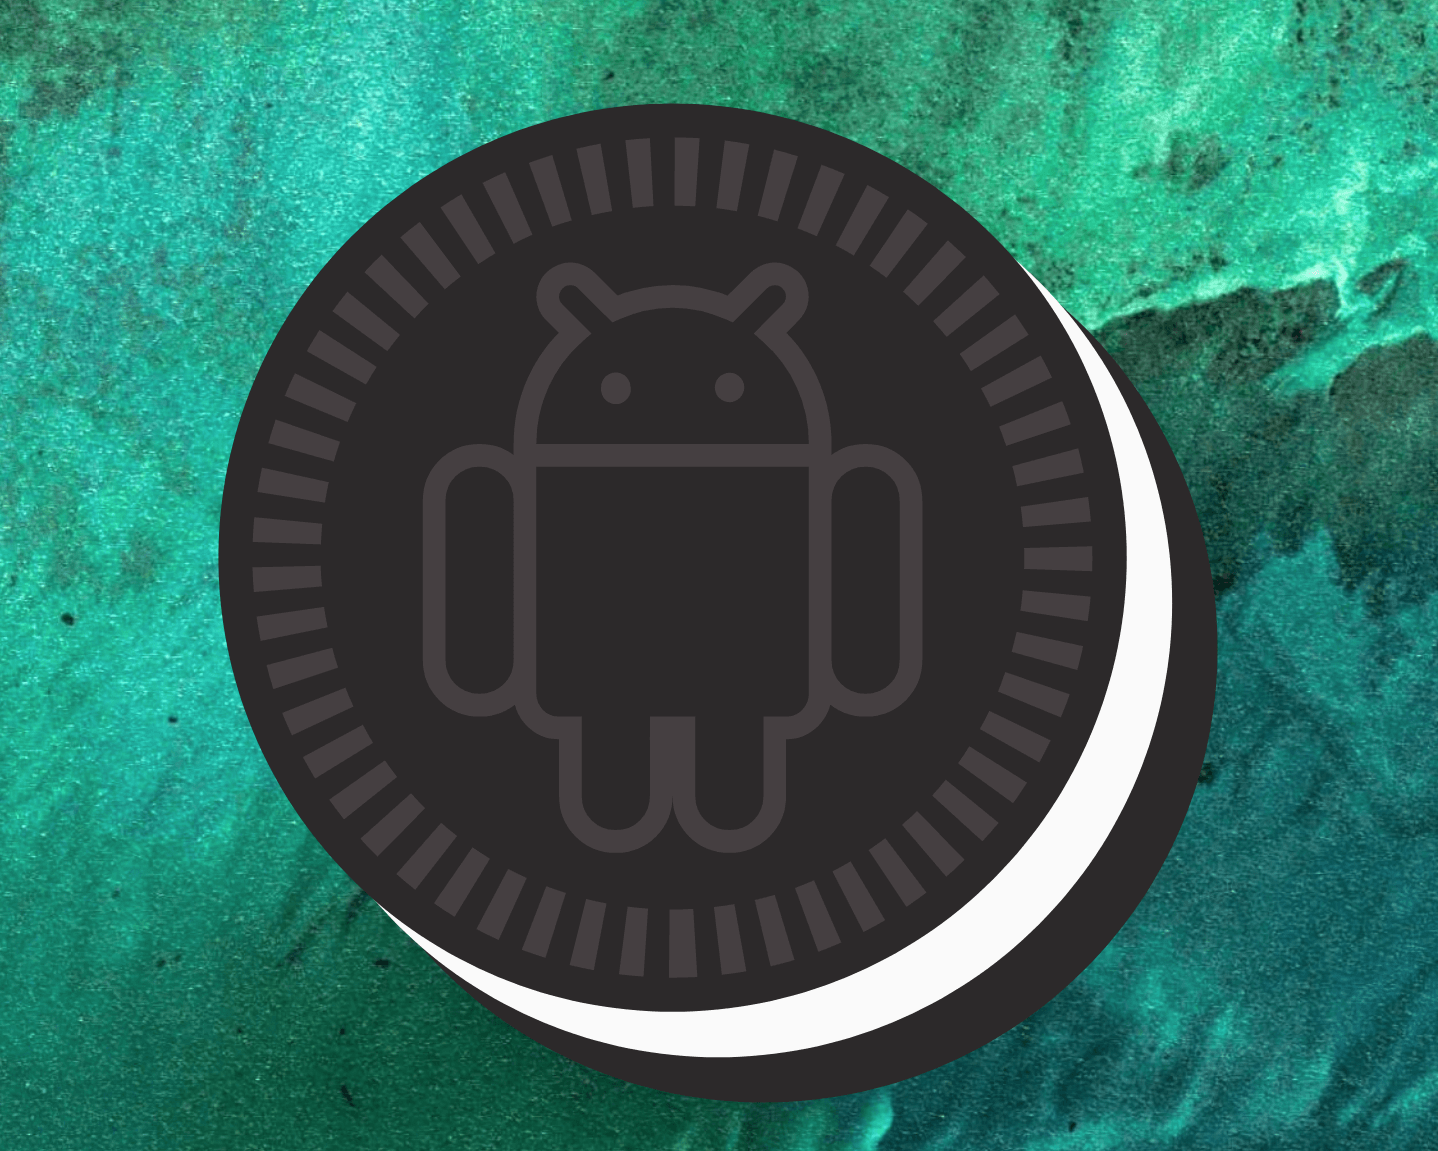 Egg Form Logo - Android 8.1 feature spotlight: A new Oreo Easter egg appears (in ...